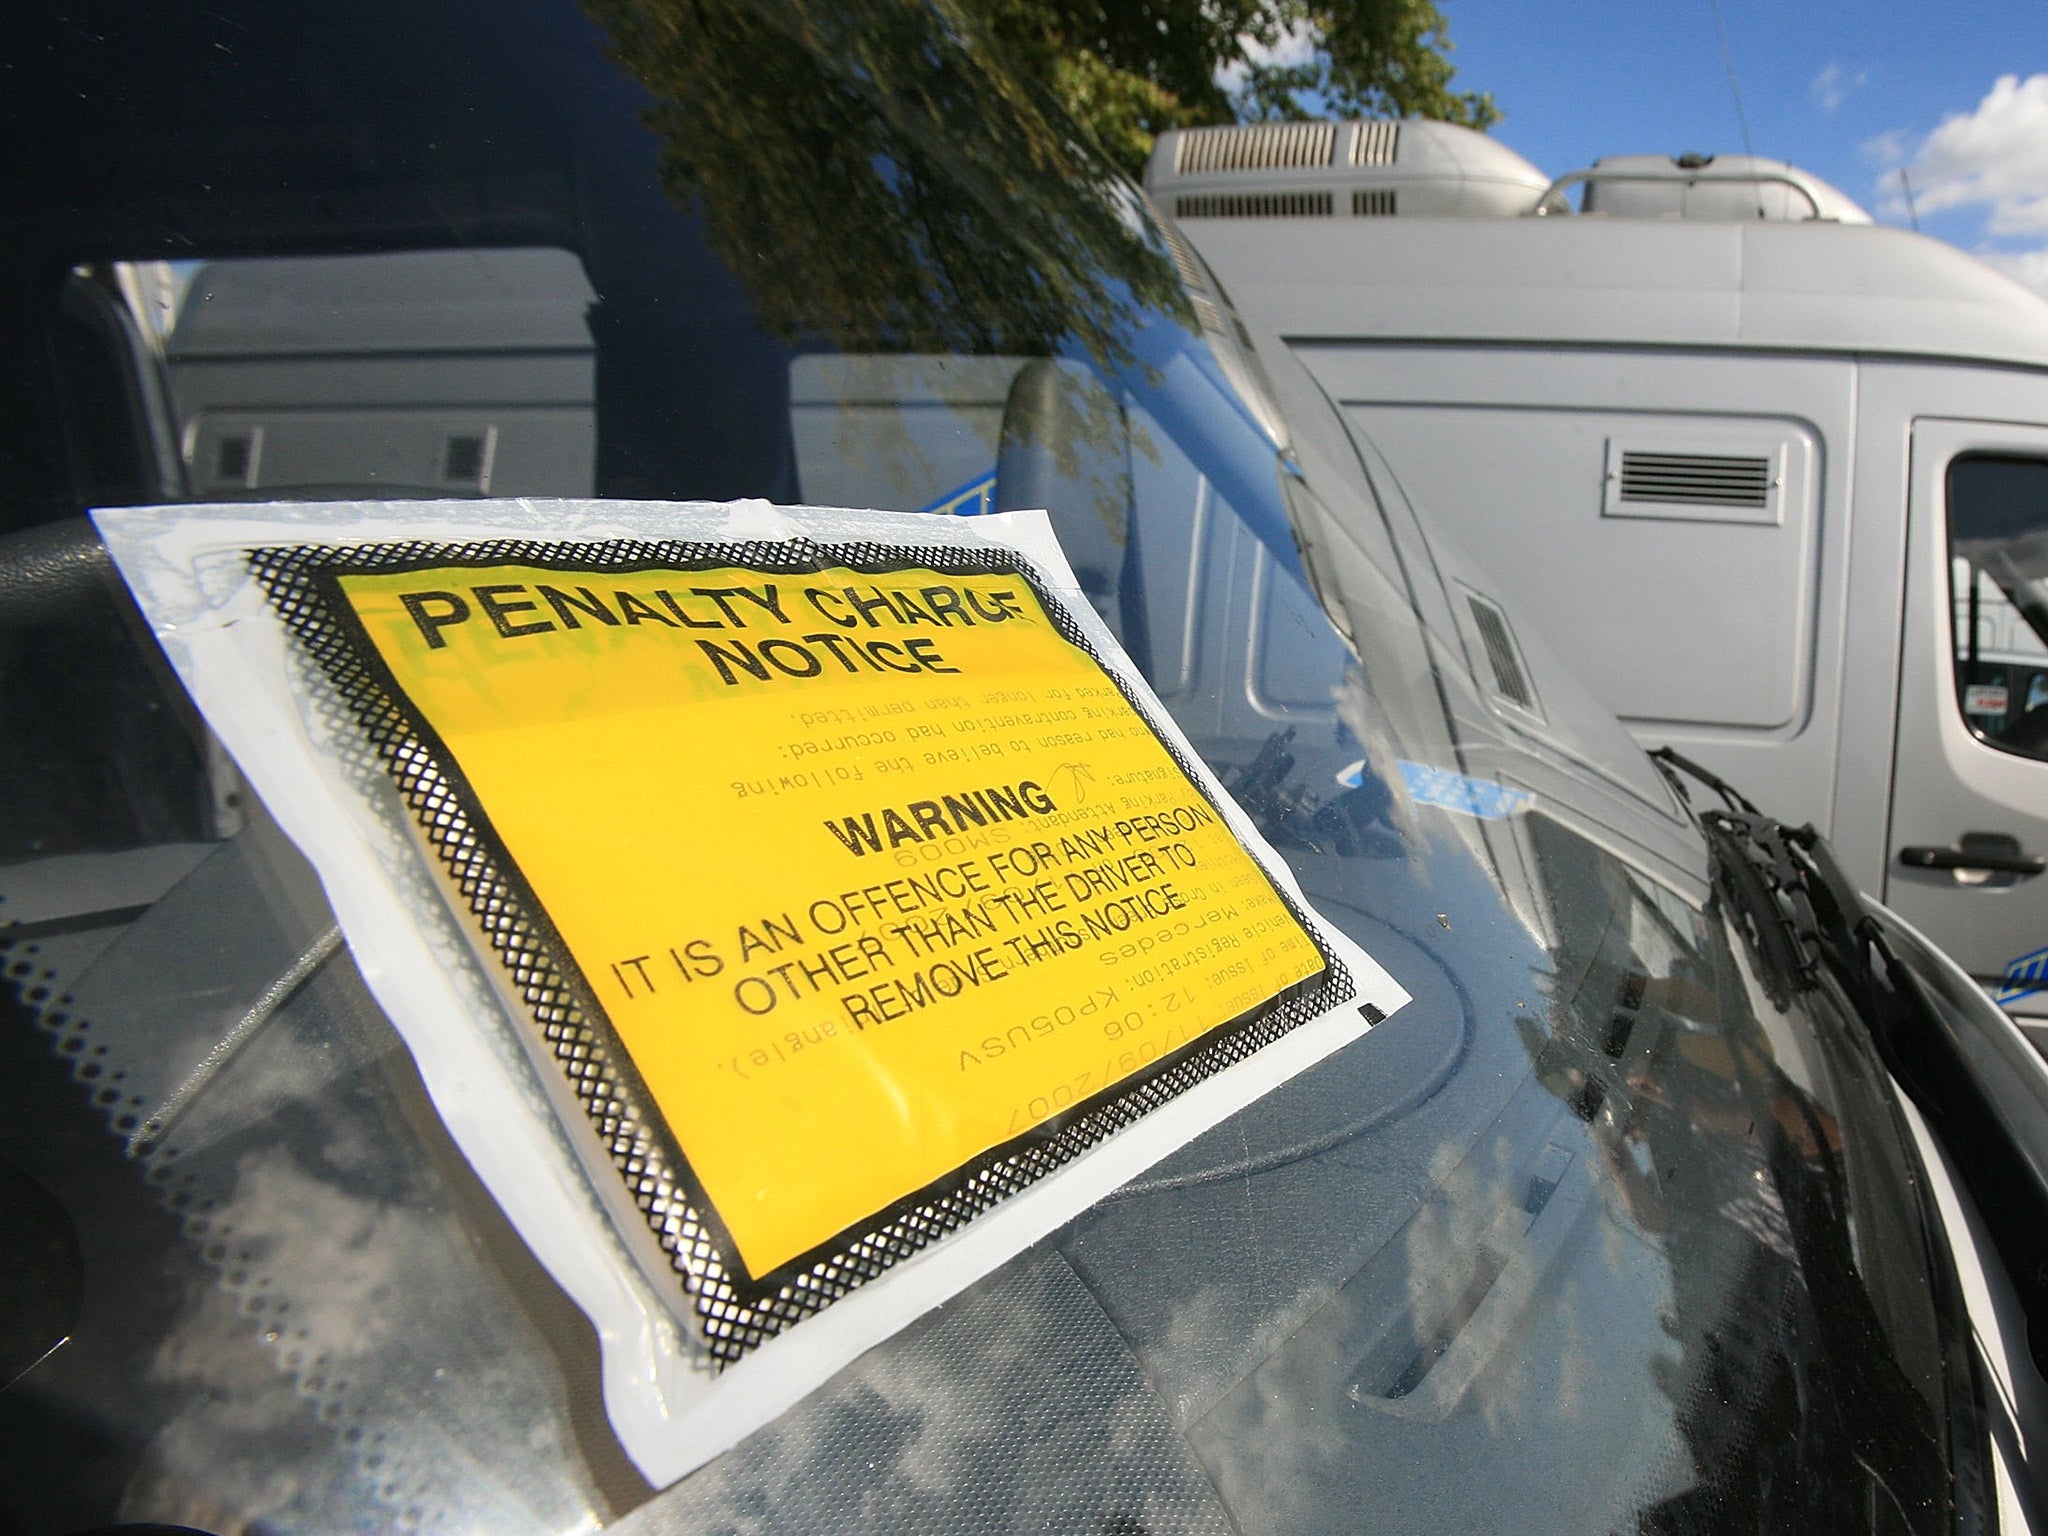 Legally, parking fines must be used to manage traffic and profits must be spent on transport and infrastructure projects